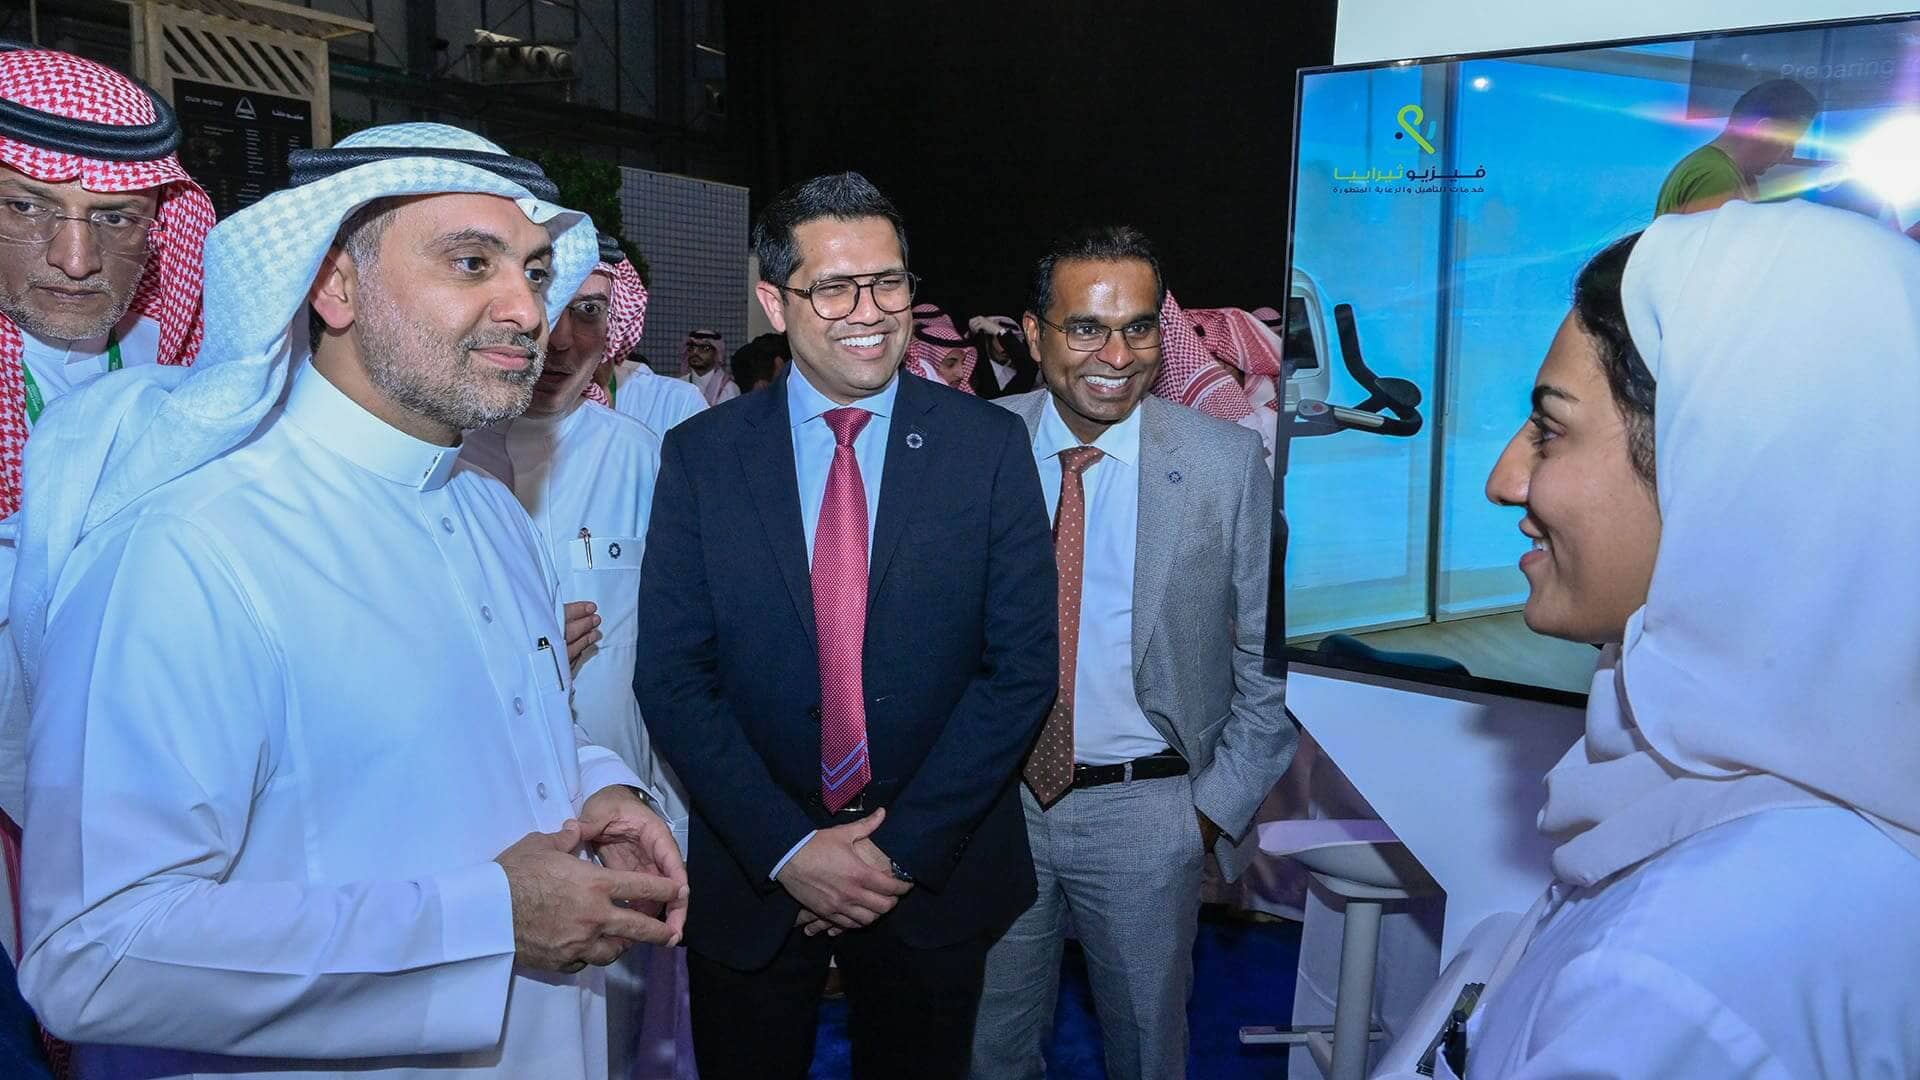 Global Health Exhibition: Saudi Health Minister Visits Burjeel Holdings’ Pavilion, Inspects ‘PhysioTherabia’ Project